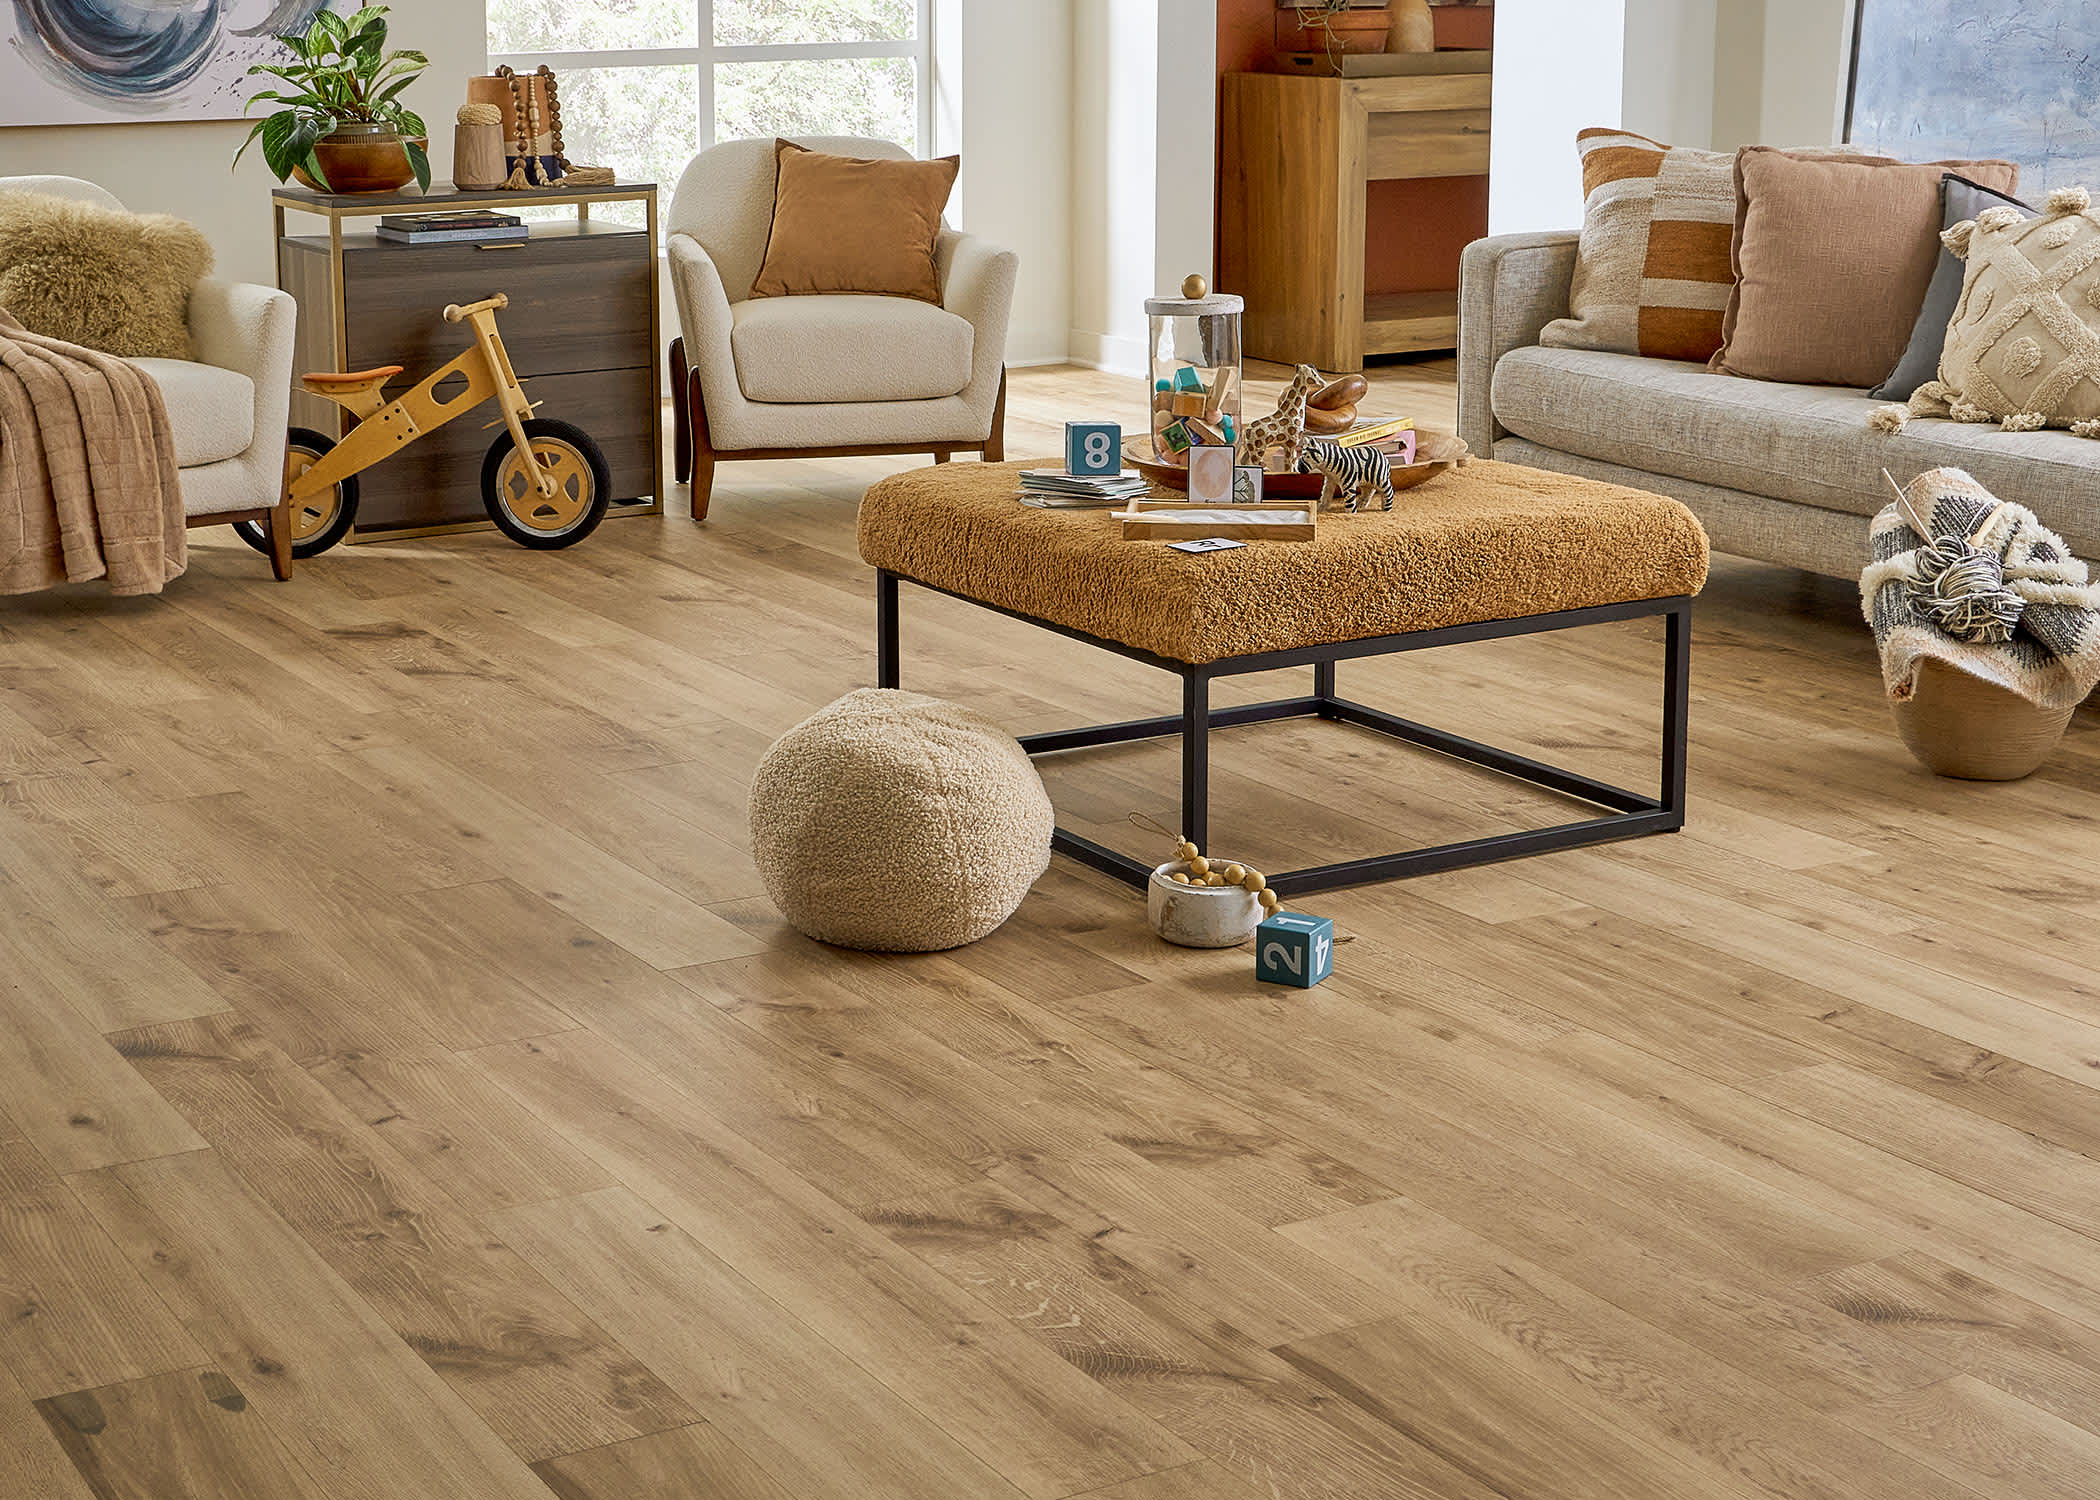 5mm with Pad Yorkshire Oak Waterproof Rigid Vinyl Plank Flooring in living room with beige furnishings plus gold upholstered ottoman and wooden tricycle and knotting material in a basket